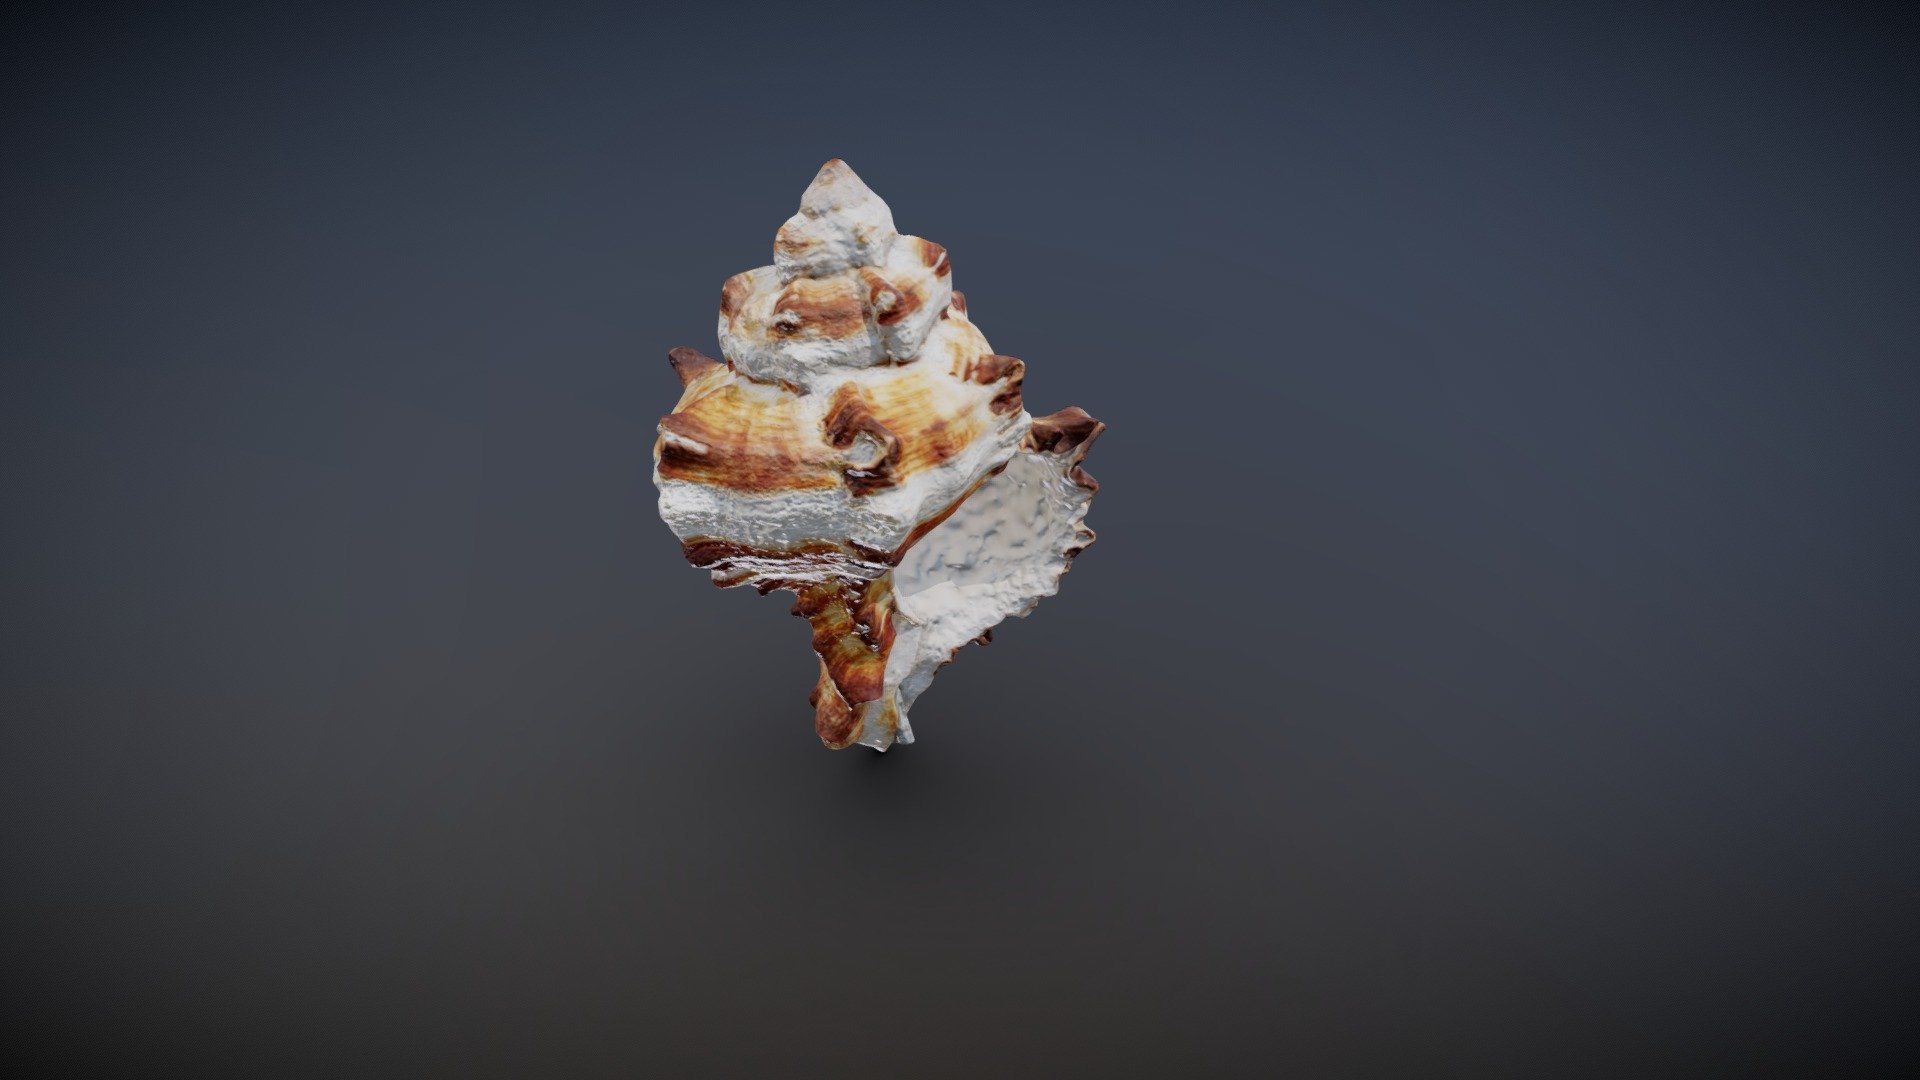 4096x4096 diffuse map
4096x4096 normal map - Shell photoscan - 3D model by Veaceslav Condraciuc (@FLED) 3d model